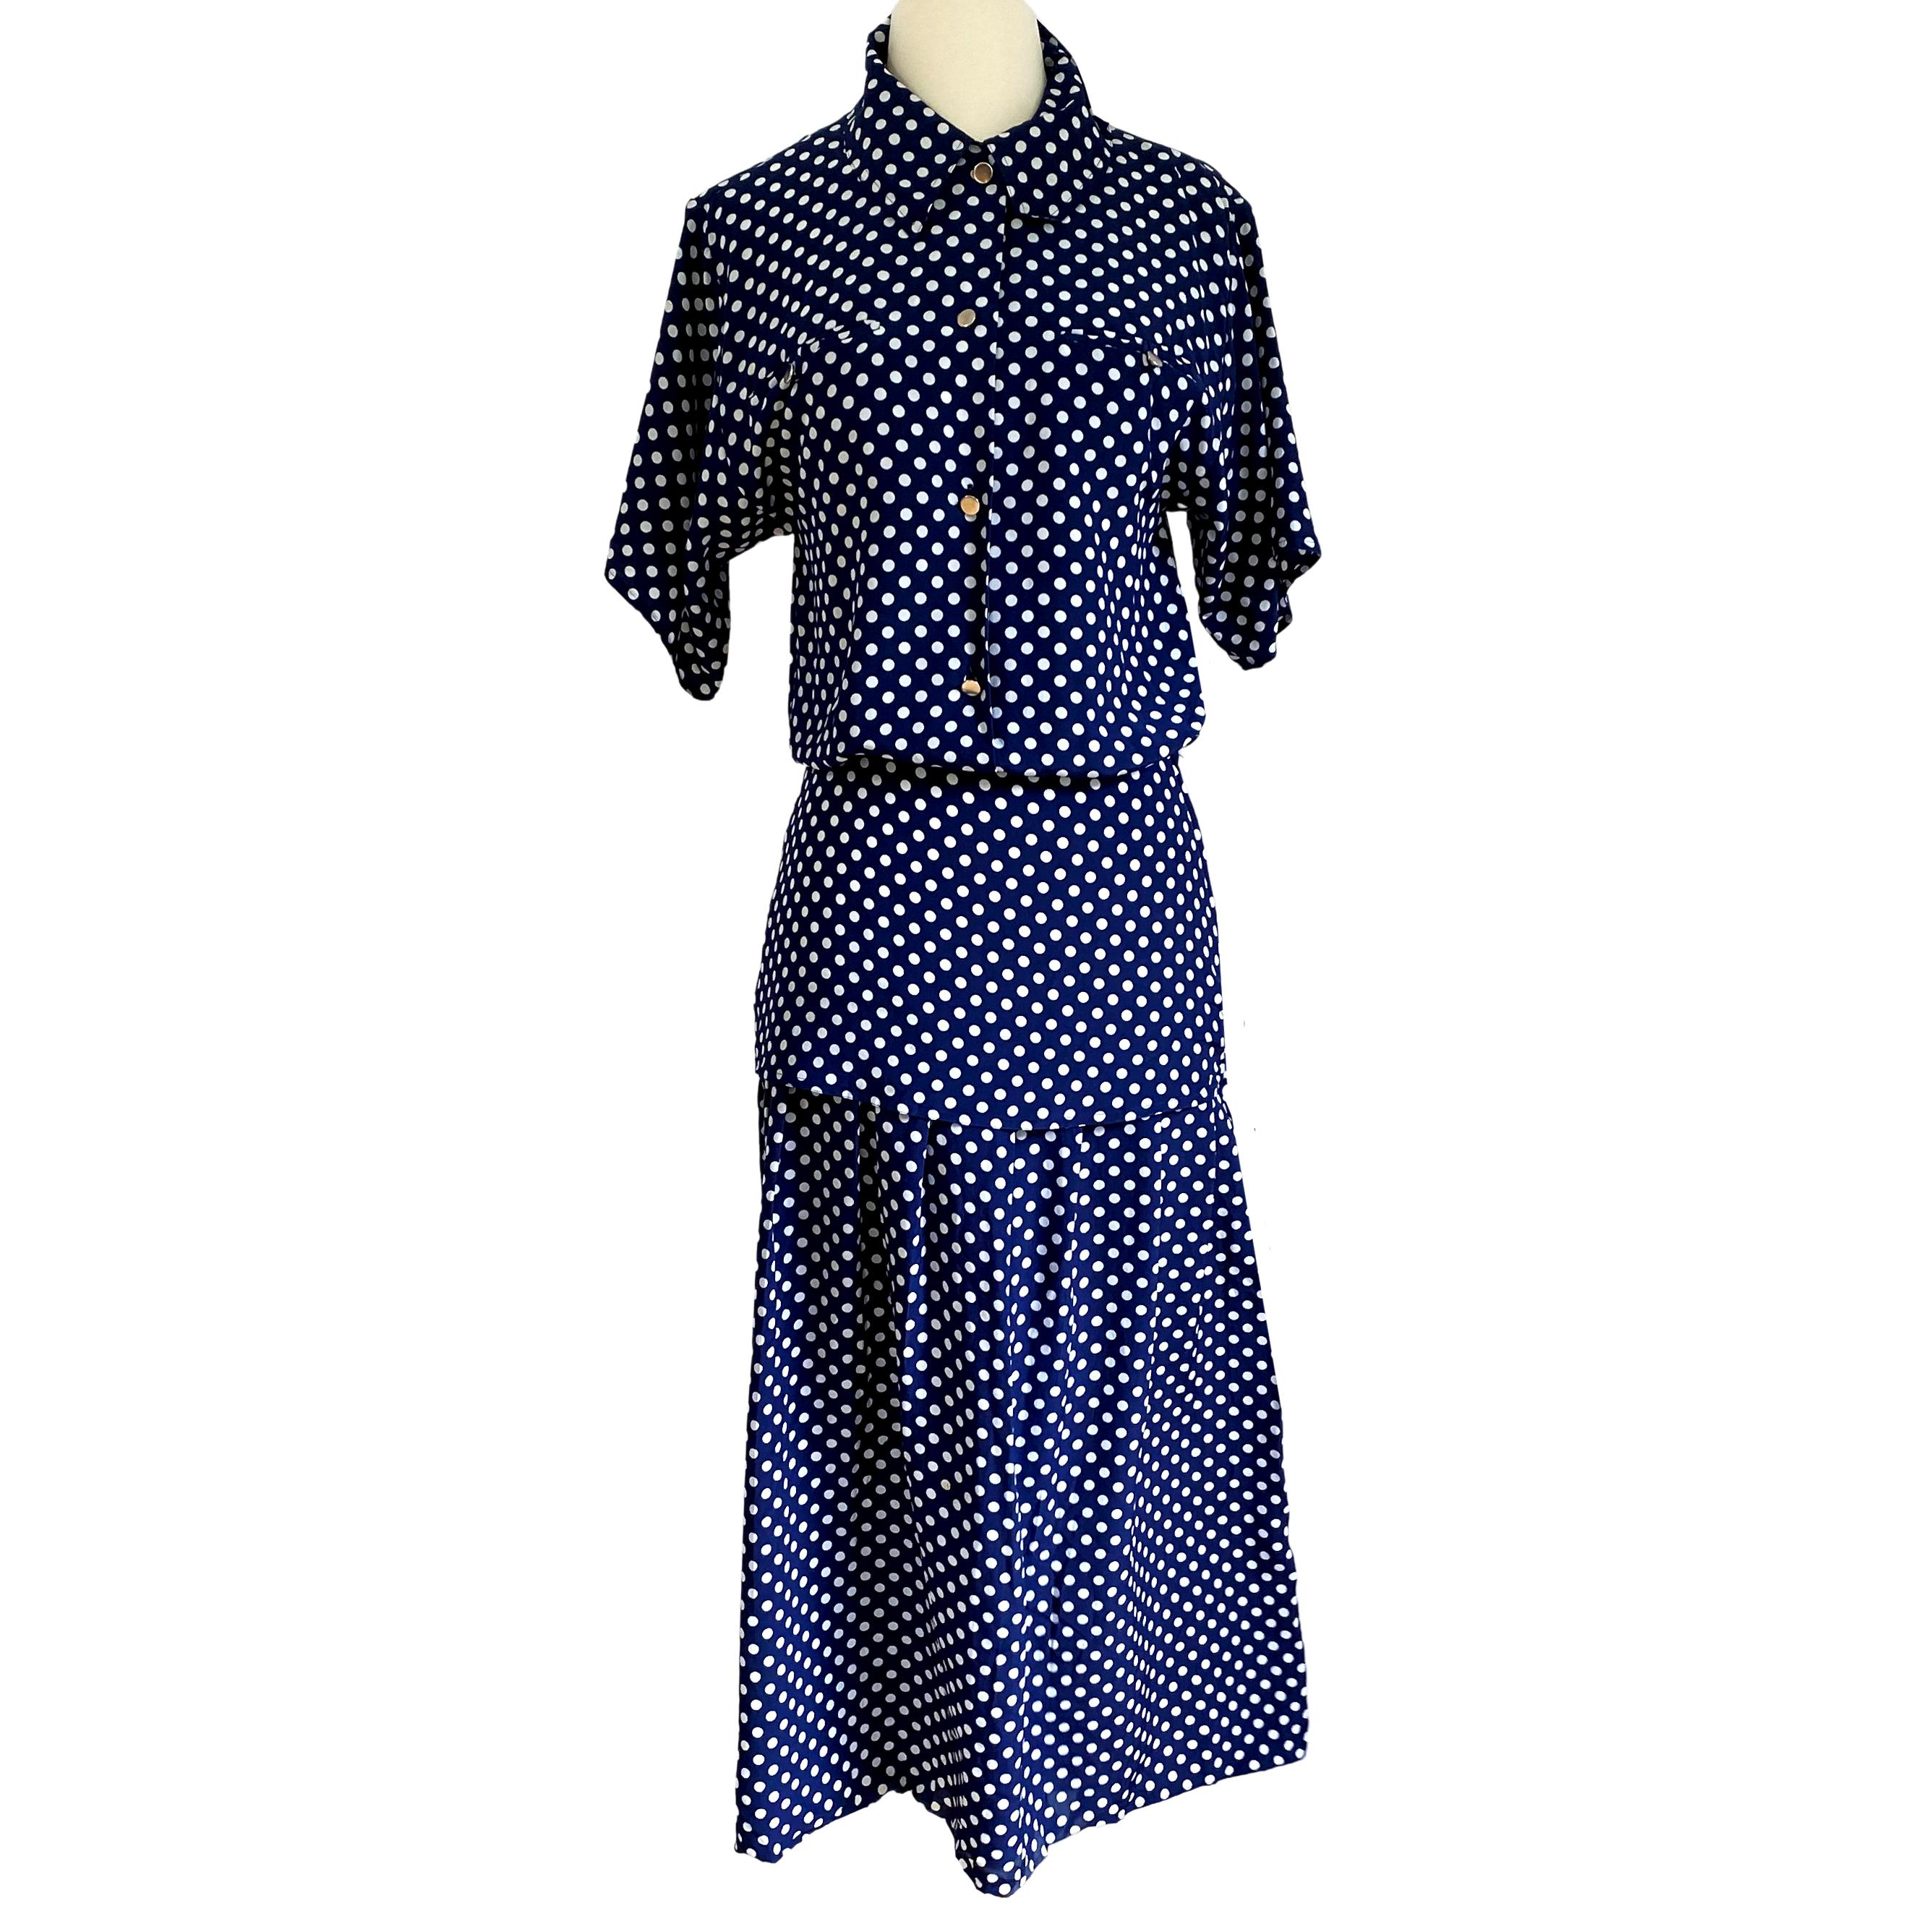 Chic, casual yet elegant navy silk crepe button-up shirt dress with pockets, hip yoke and fly-away skirt.
Material: 100% long-filament silk crepe
Print: white polka dots on navy.
Closing: button front, side zip and snaps.
Only one available.
Wear